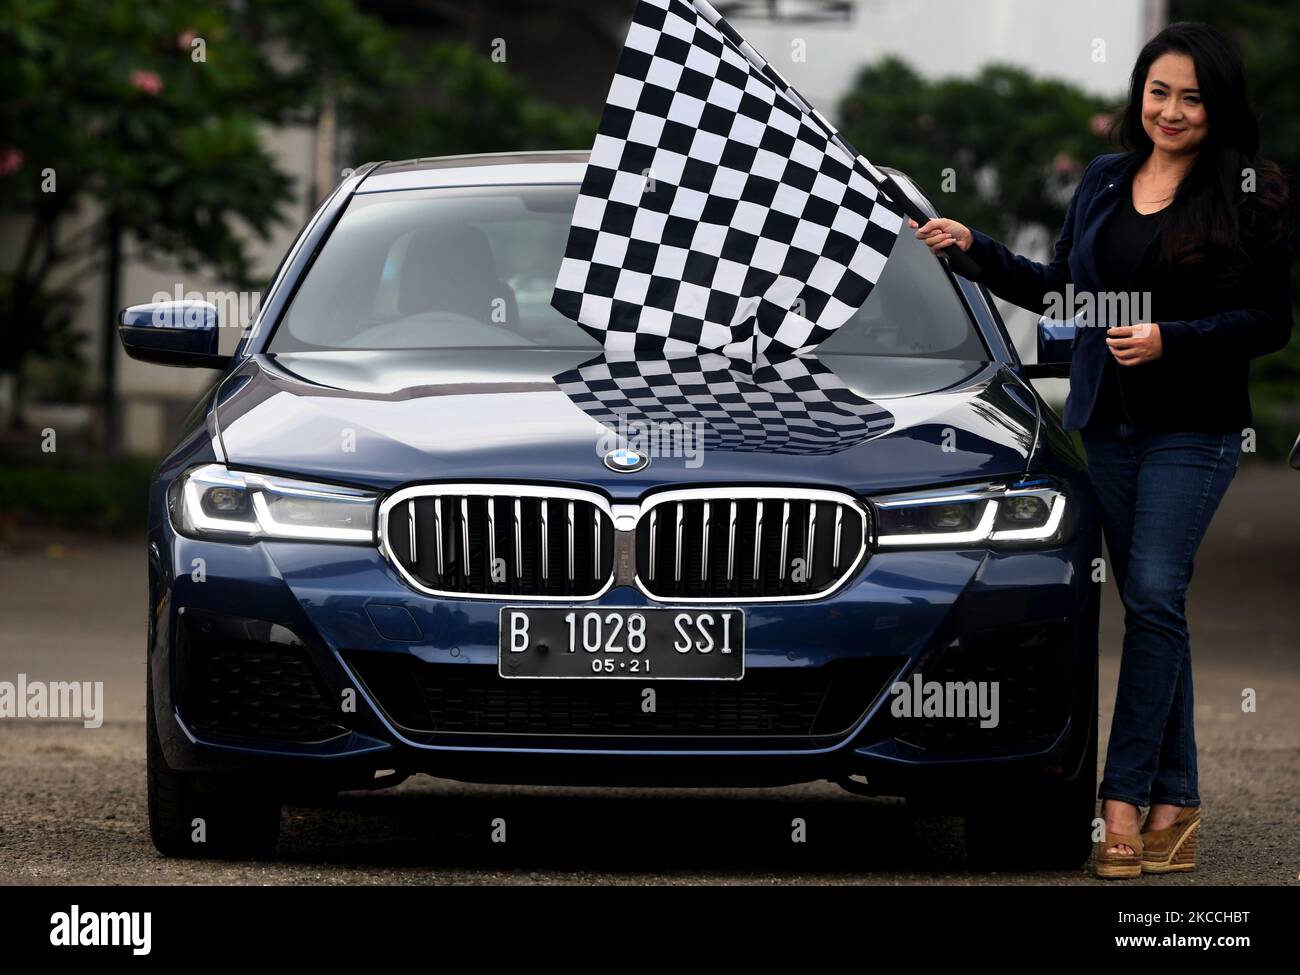 Director of Communications BMW Group Indonesia Jodie O'tania showing the latest BMW ''The New 5'' Type BMW 520i M Sport at the BMW Test Day event in Karawaci, Tangerang, Banten, on April, 10, 2021. Business sedan car assembled in Indonesia It features an exclusive interior and comfort while in or in the wheelhouse with safety sensor facilities while driving and is priced at IDR 1.1 billion. (Photo by Dasril Roszandi/NurPhoto) Stock Photo